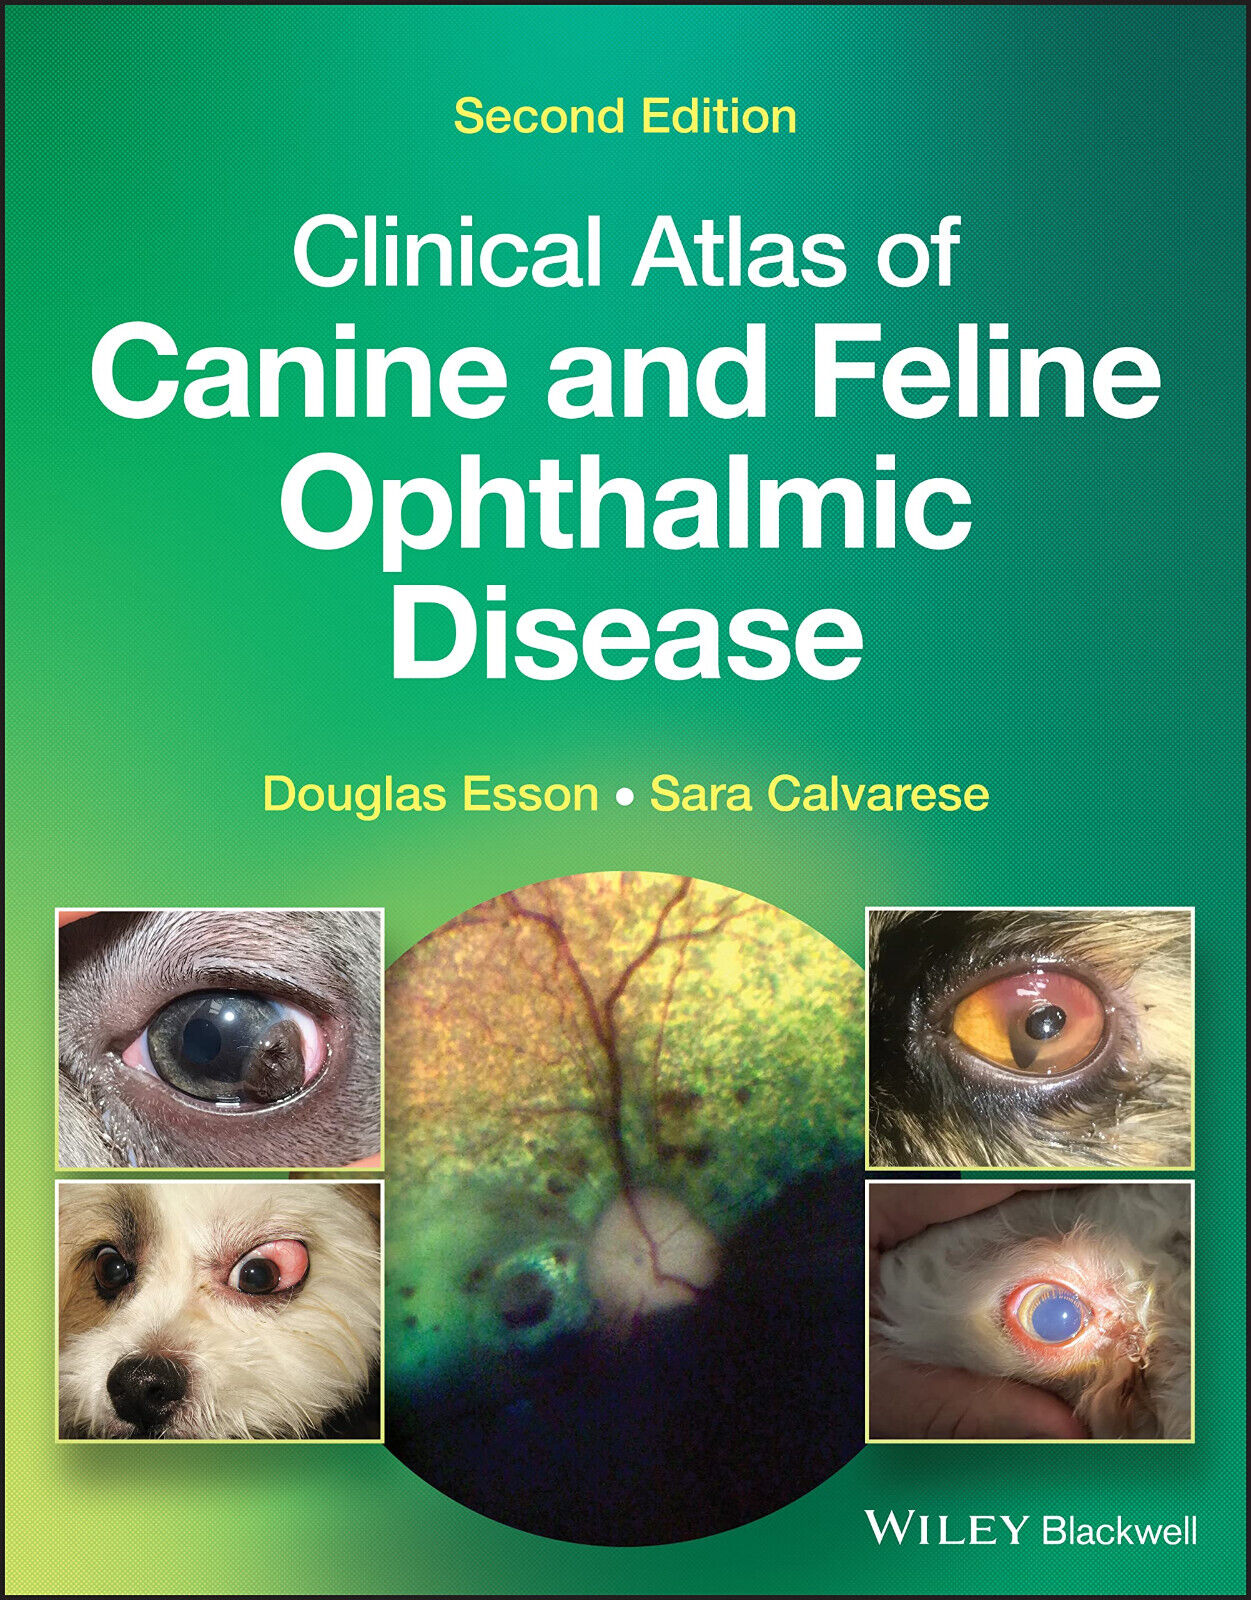 Clinical Atlas of Canine and Feline Ophthalmic Disease-John Wiley And Sons, 2022